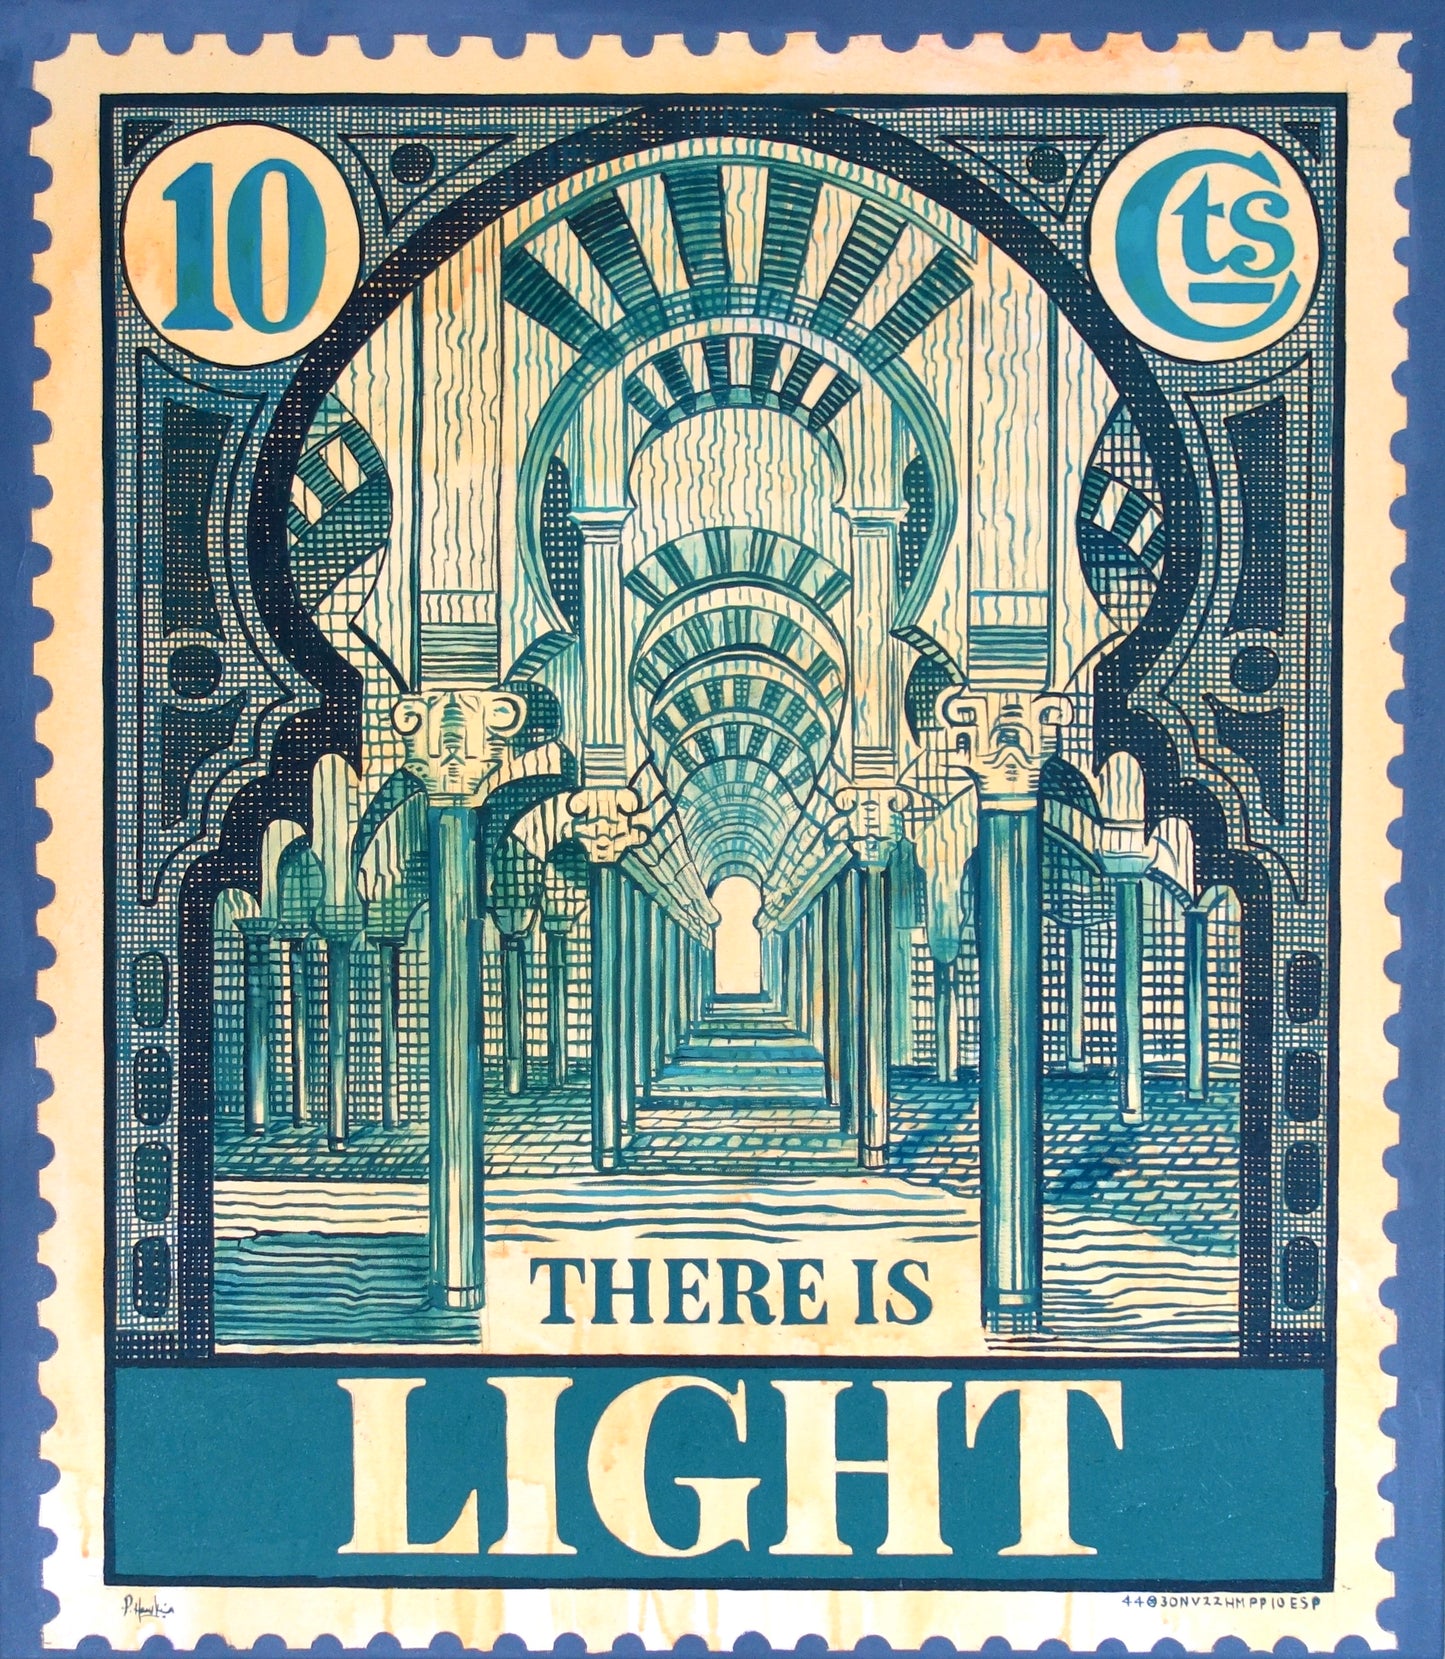 There is light (Blue)